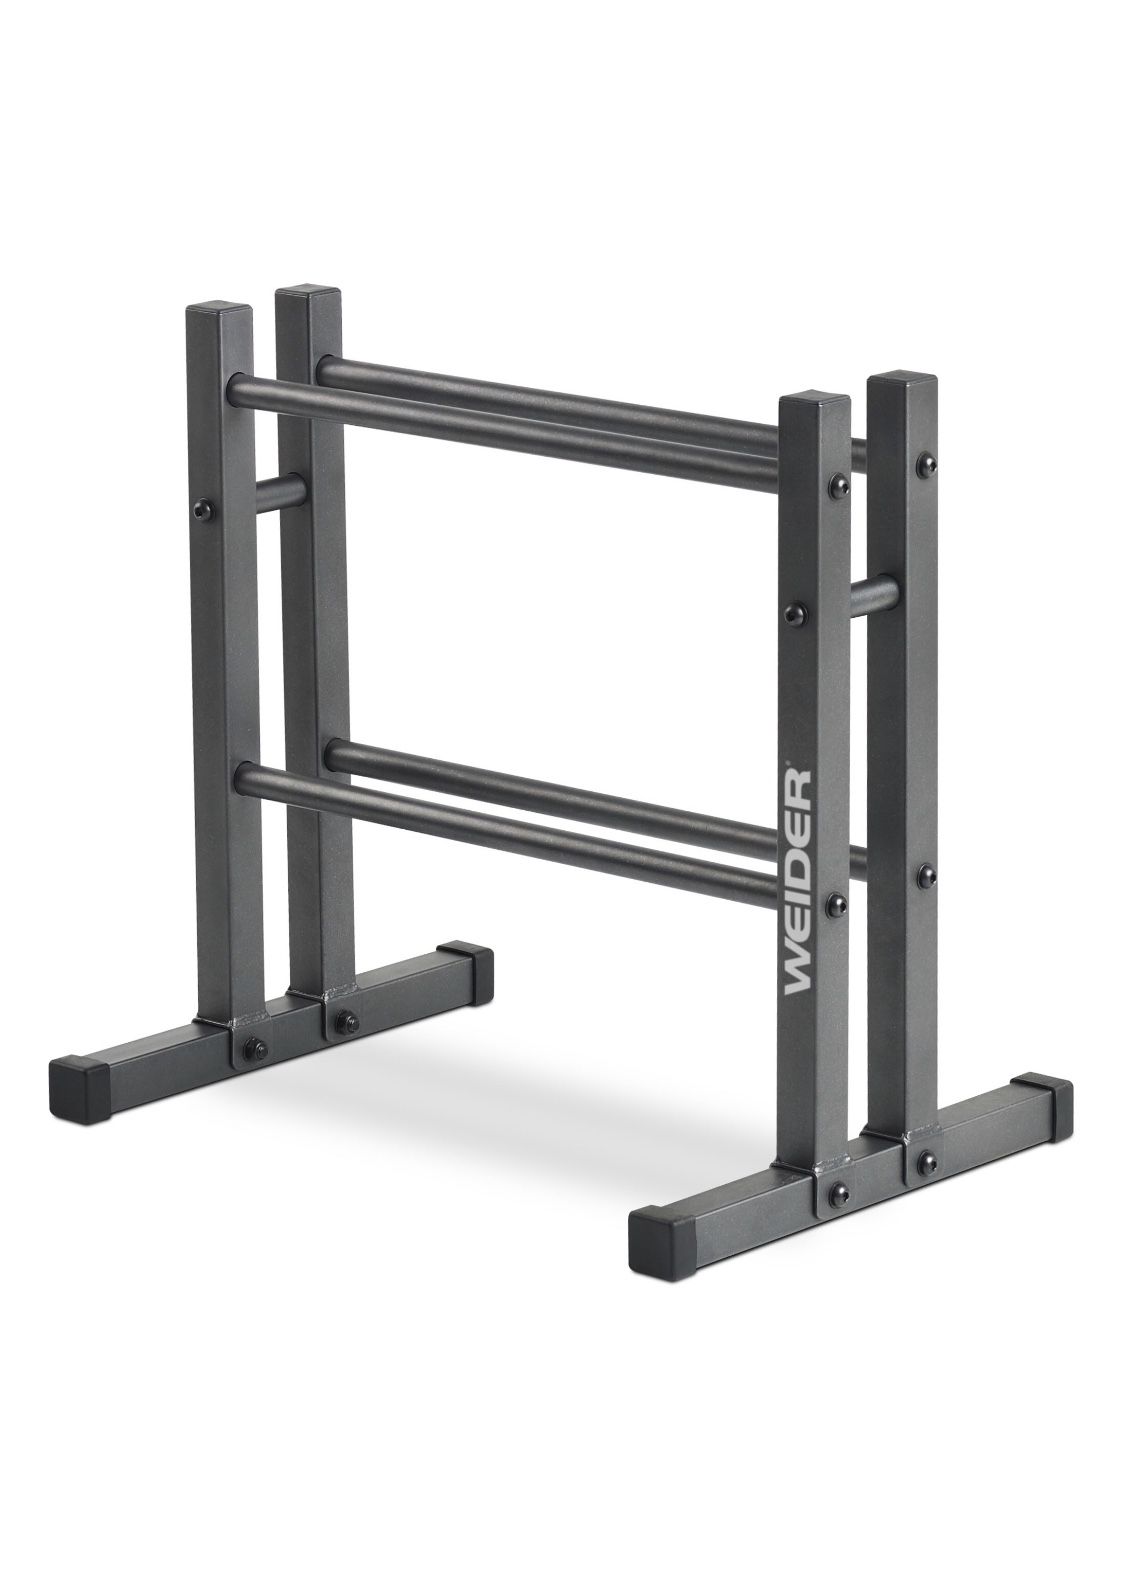 Two-Tier Utility Weights Rack for Dumbbell, Kettlebell, and Medicine Ball Storage -Brand New in the Box 📦!